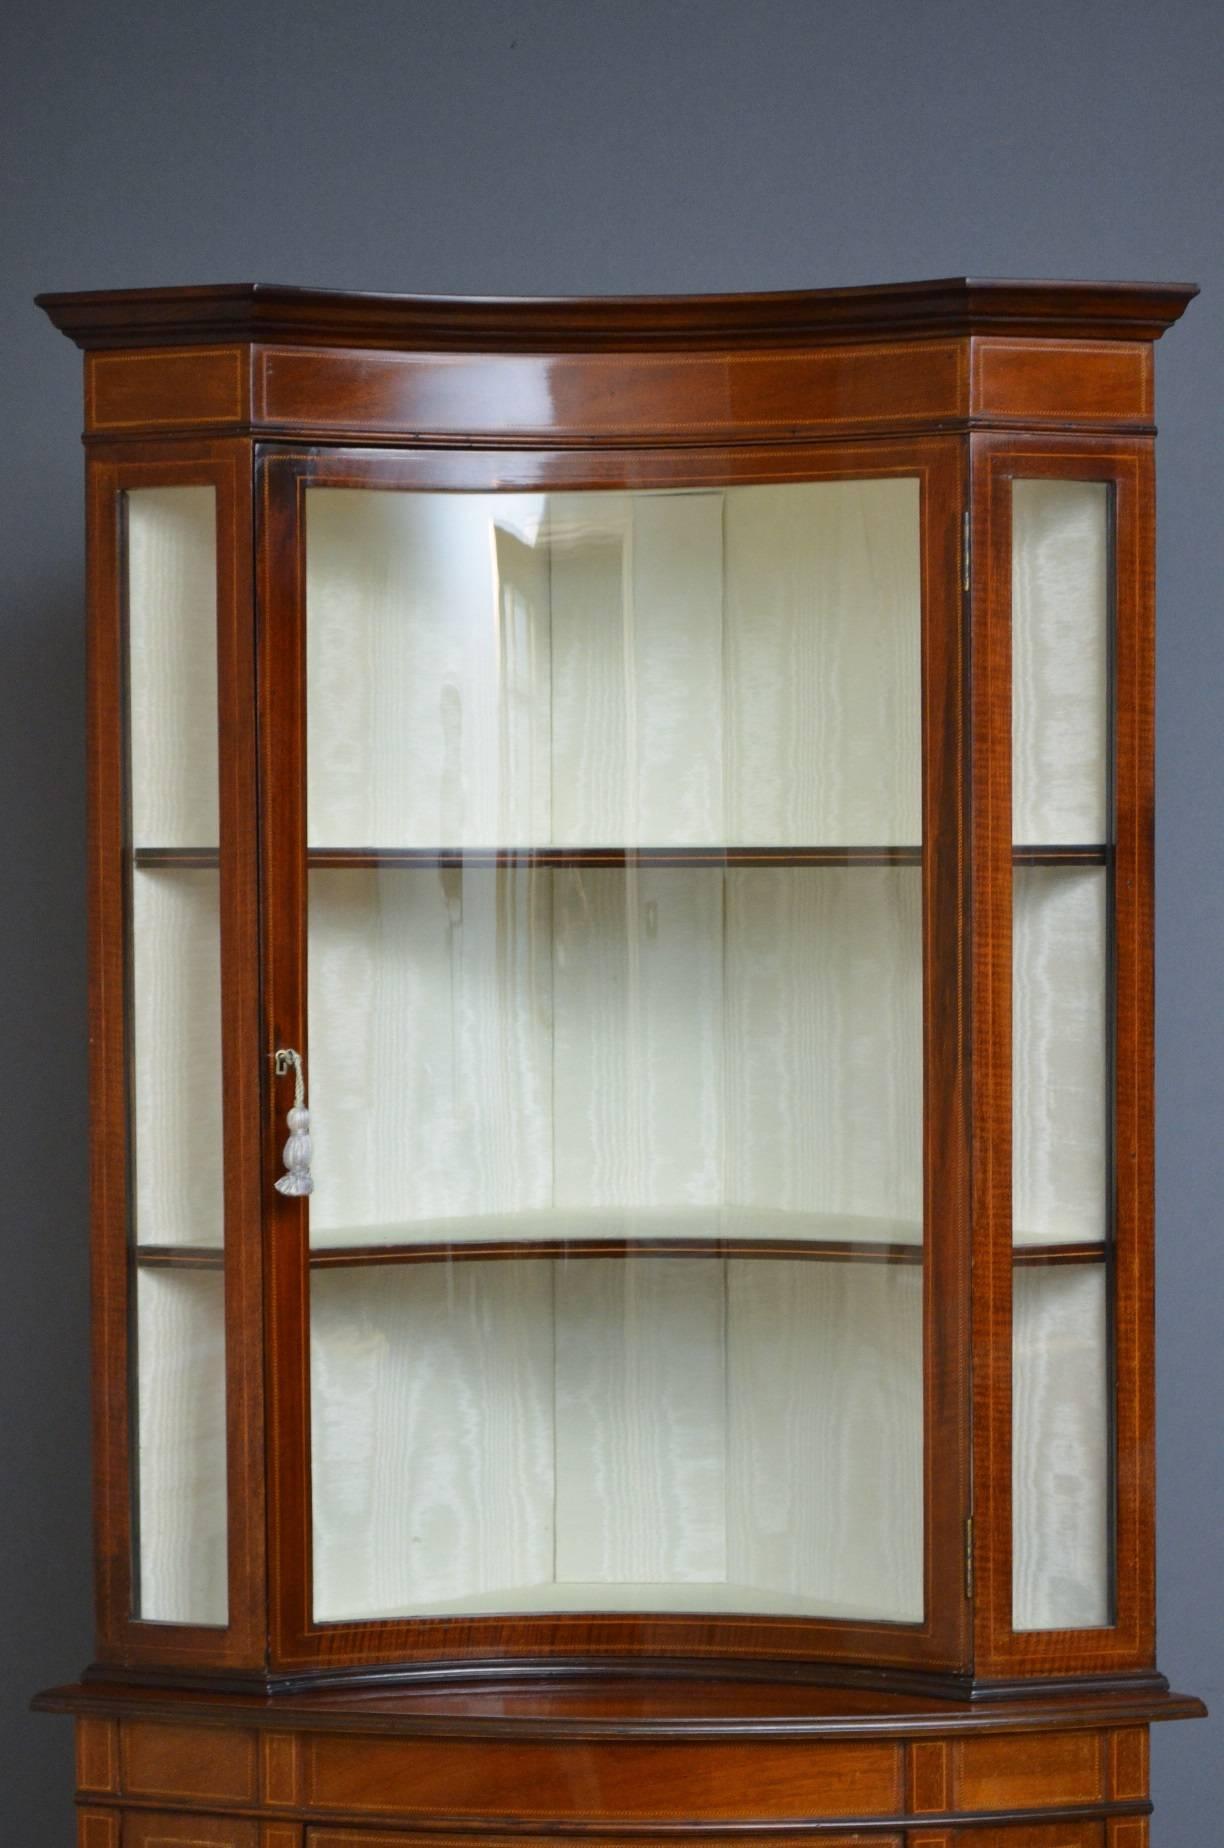 Sn3992, a rare and unusual Edwardian, mahogany, display cabinet or vitrine, having inlaid frieze above concave string inlaid glazed door enclosing two shelves, base having finely inlaid and bowed cupboard door, all raised on slender tapering legs